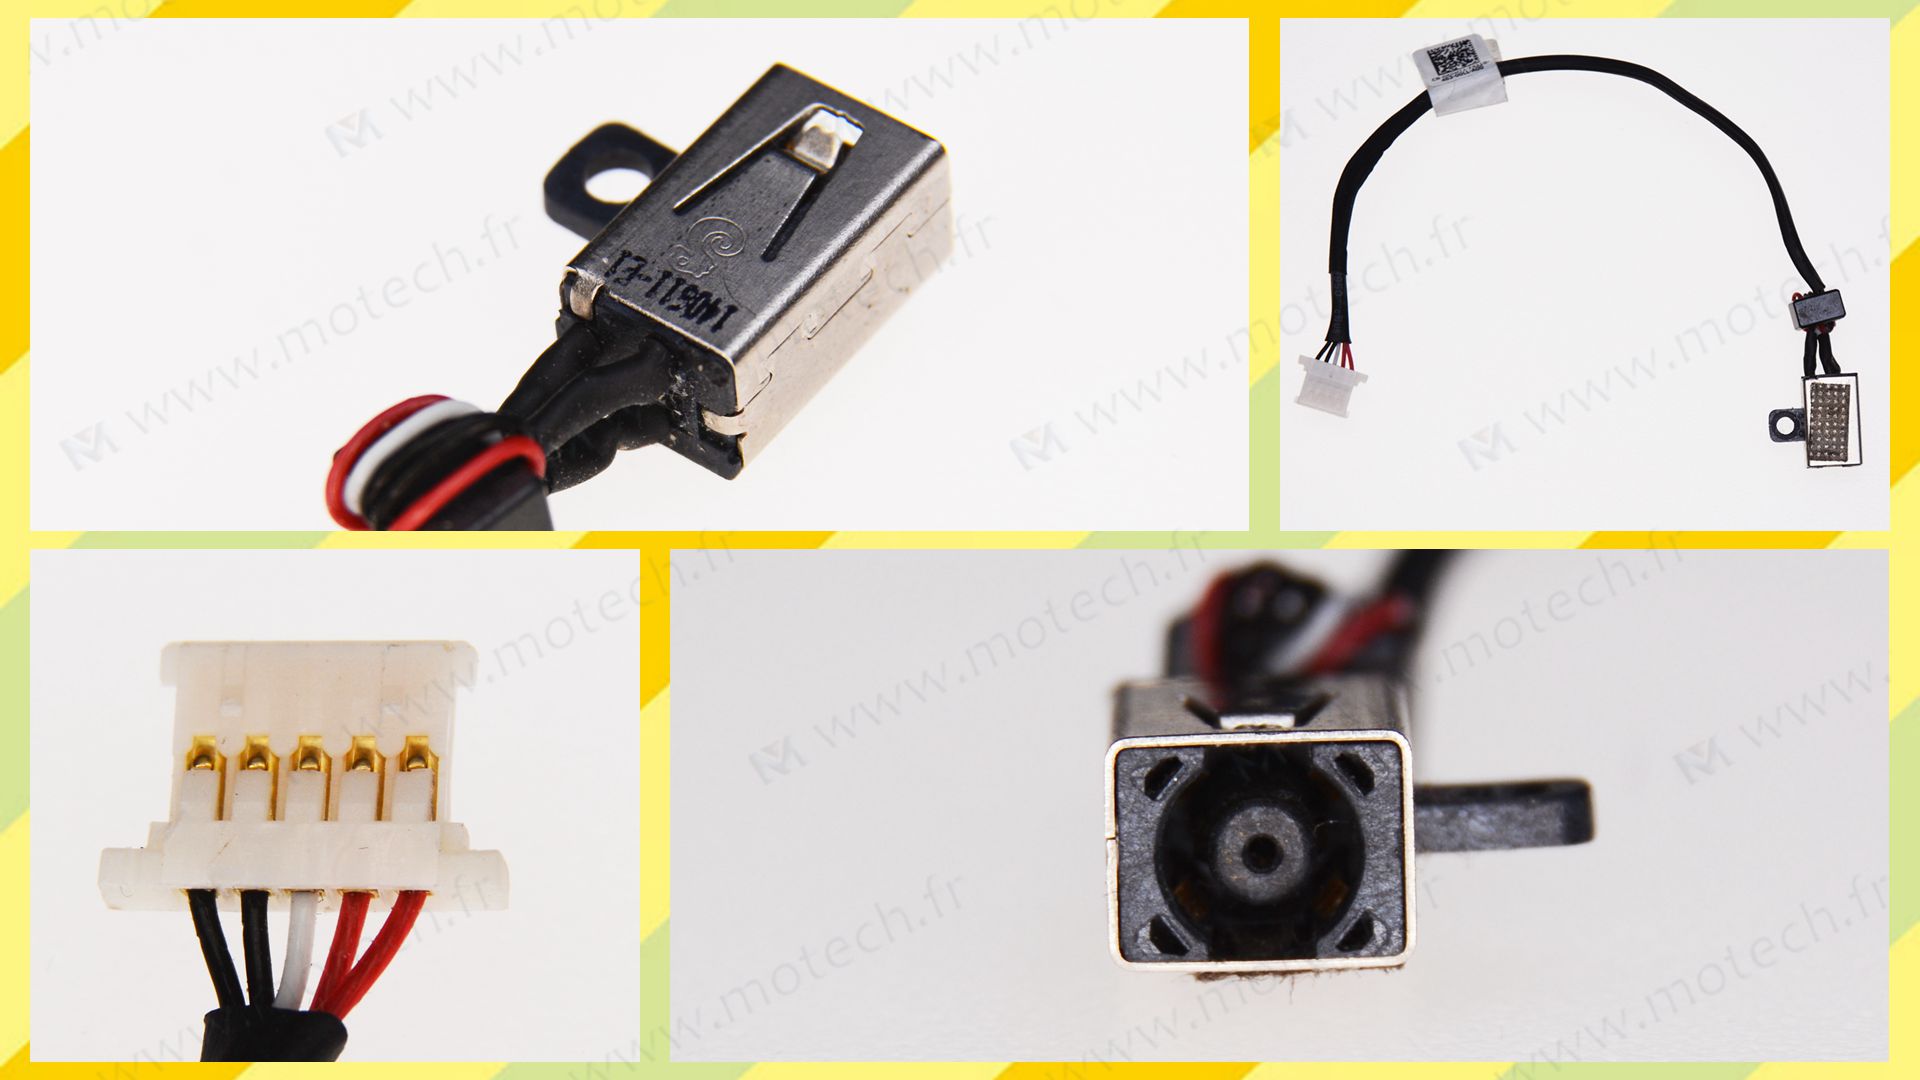 Dell XPS 13 9333 DC Jack, DC IN Câble Dell XPS 13 9333, Dell XPS 13 9333 Jack alimentation, Dell XPS 13 9333 Power Jack, Dell XPS 13 9333 Prise Connecteur, Dell XPS 13 9333 Connecteur alimentation, Dell XPS 13 9333 connecteur de charge, 